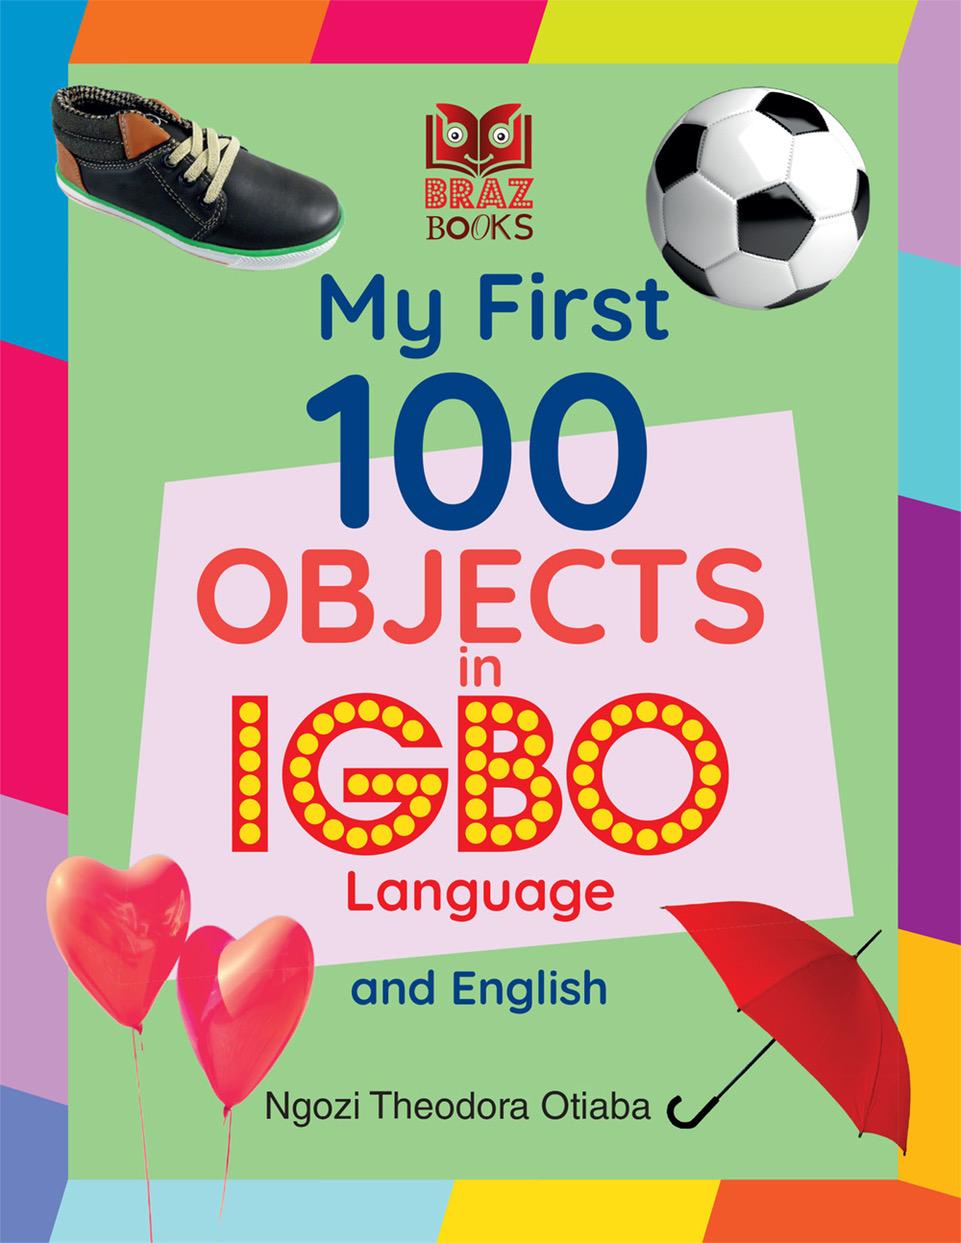 Book My First 100 Objects in Igbo and English 